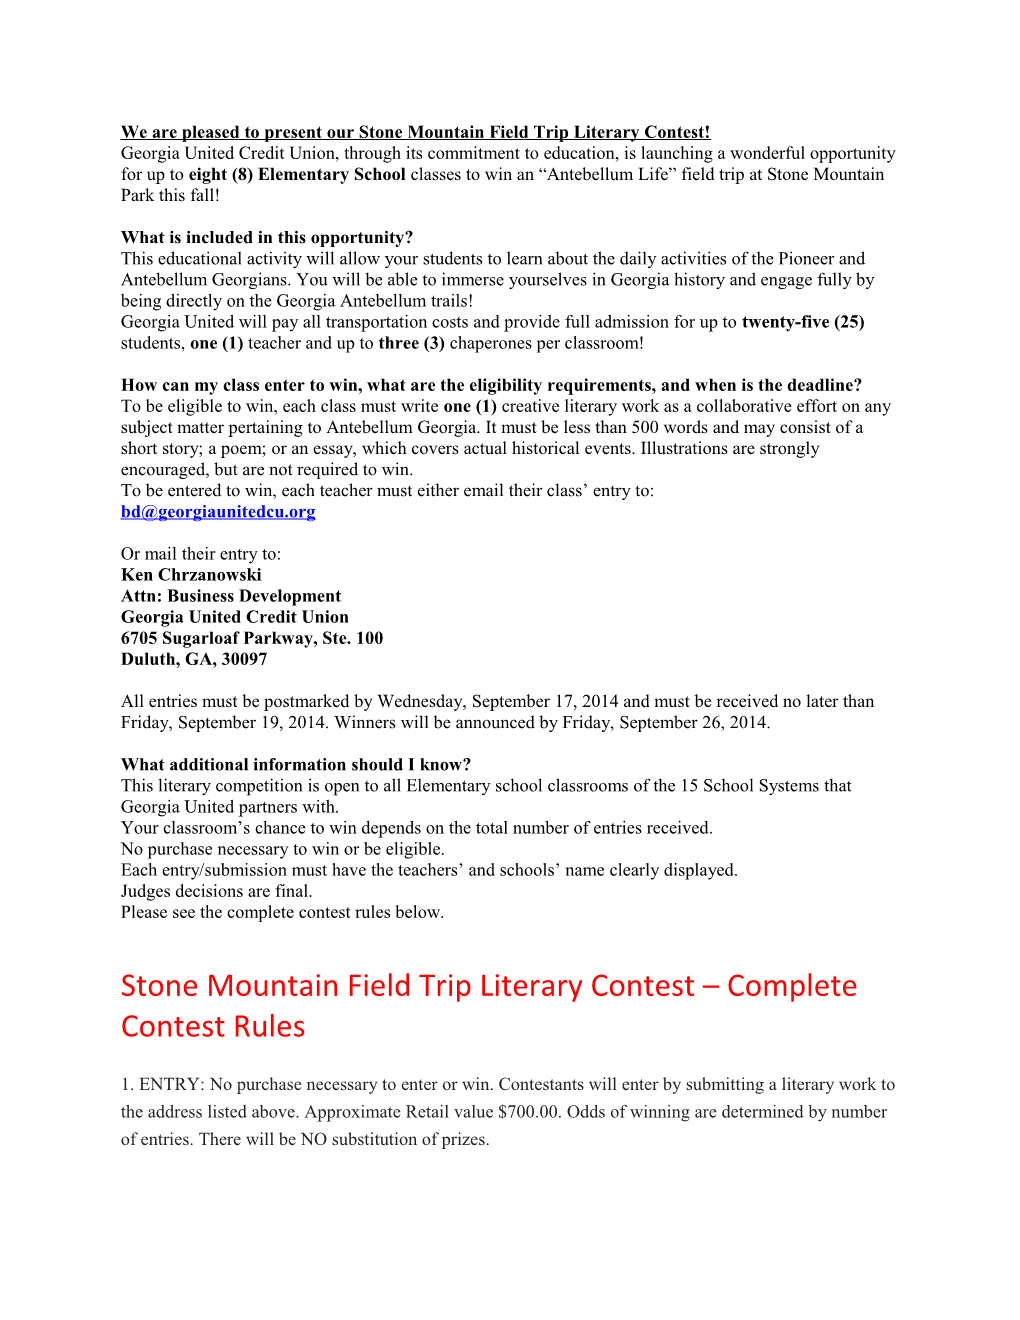 We Are Pleased to Present Our Stone Mountain Field Trip Literary Contest!